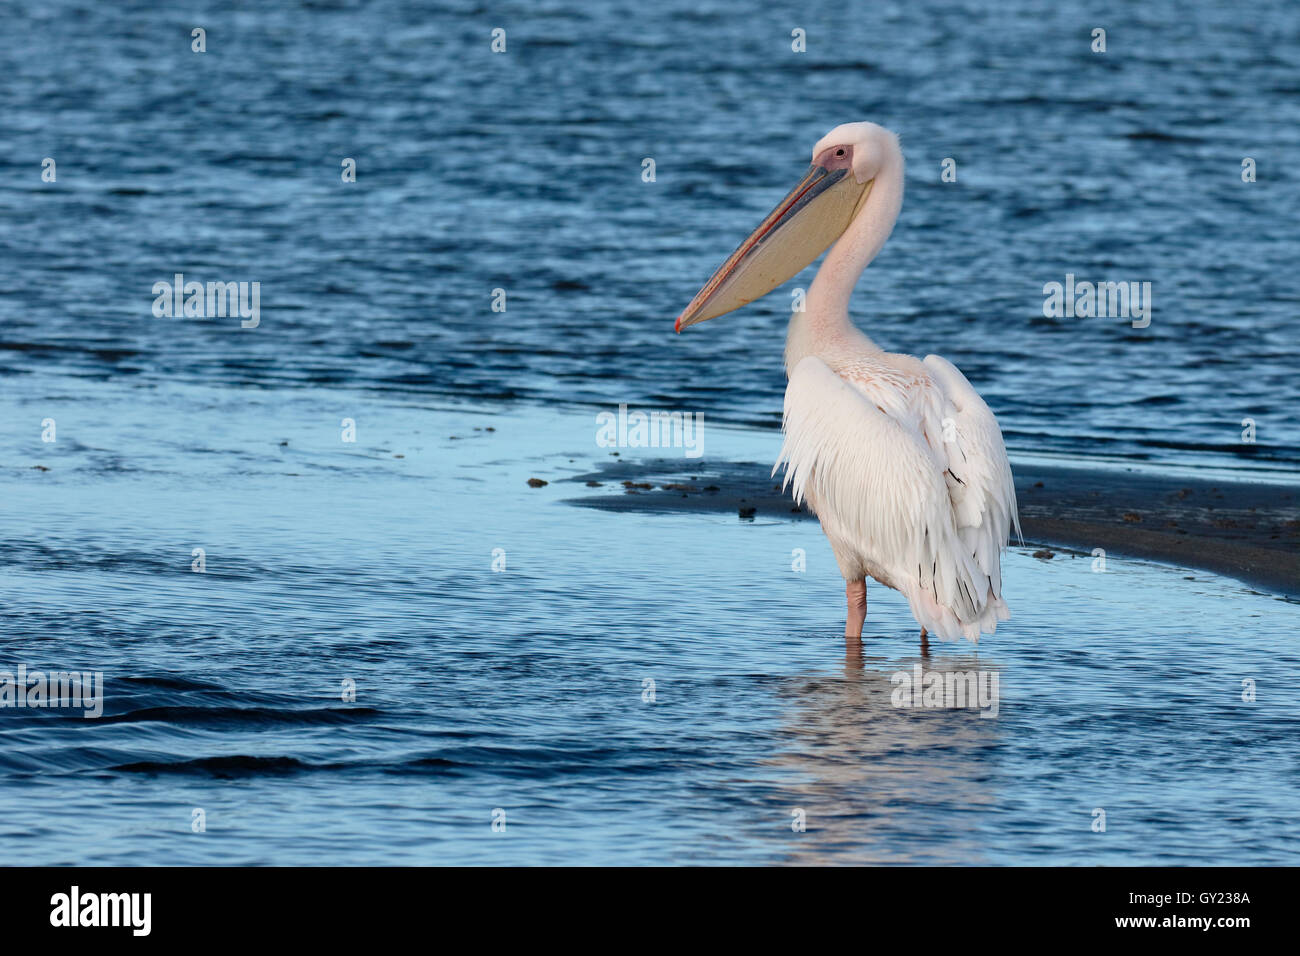 Eastern-white pelican, Pelecanus onocrotalus, single bird by water, South Africa, August 2016 Stock Photo